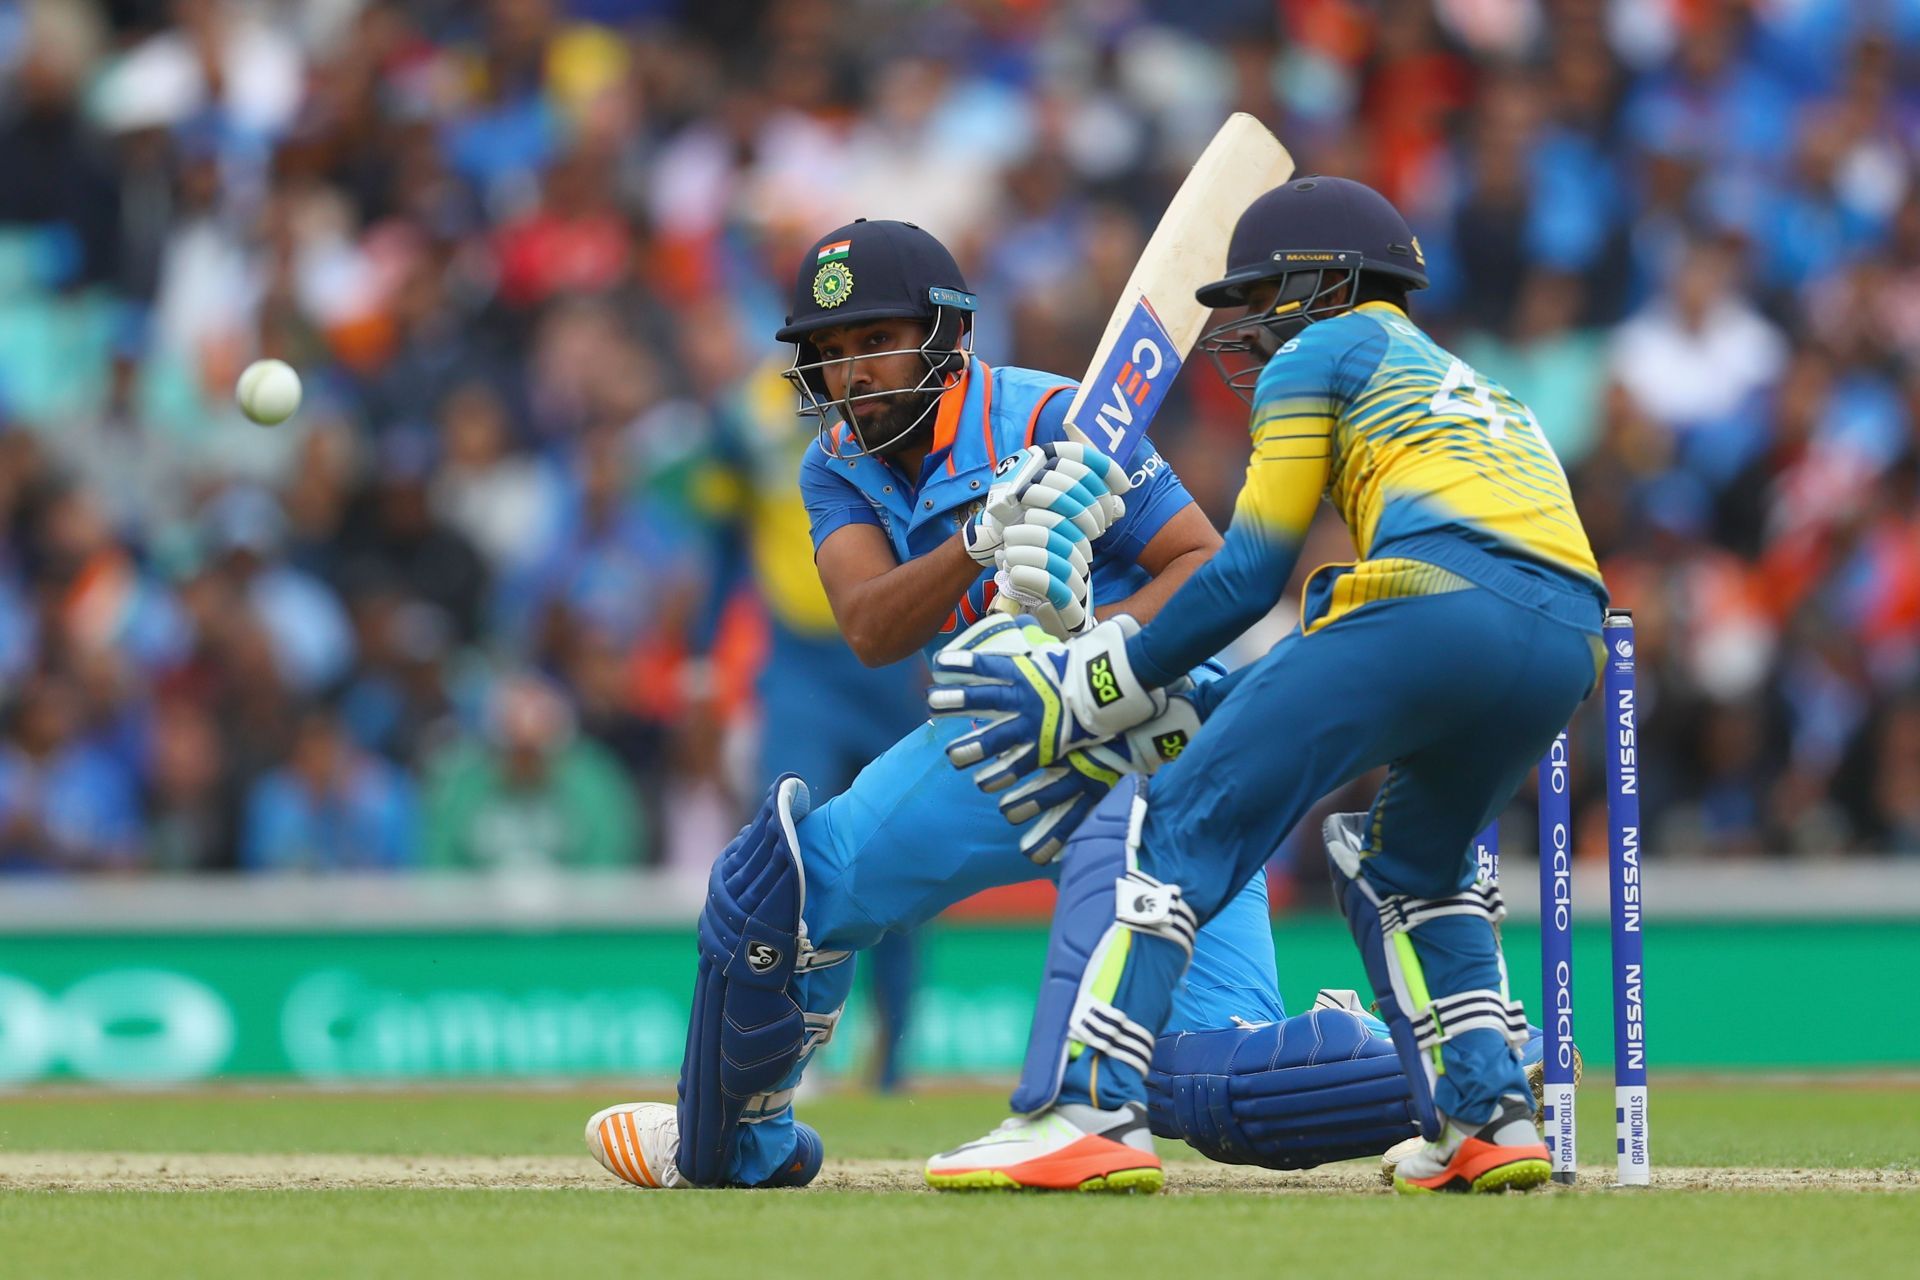 India and Sri Lanka are the most successful teams in the history of the Asia Cup.